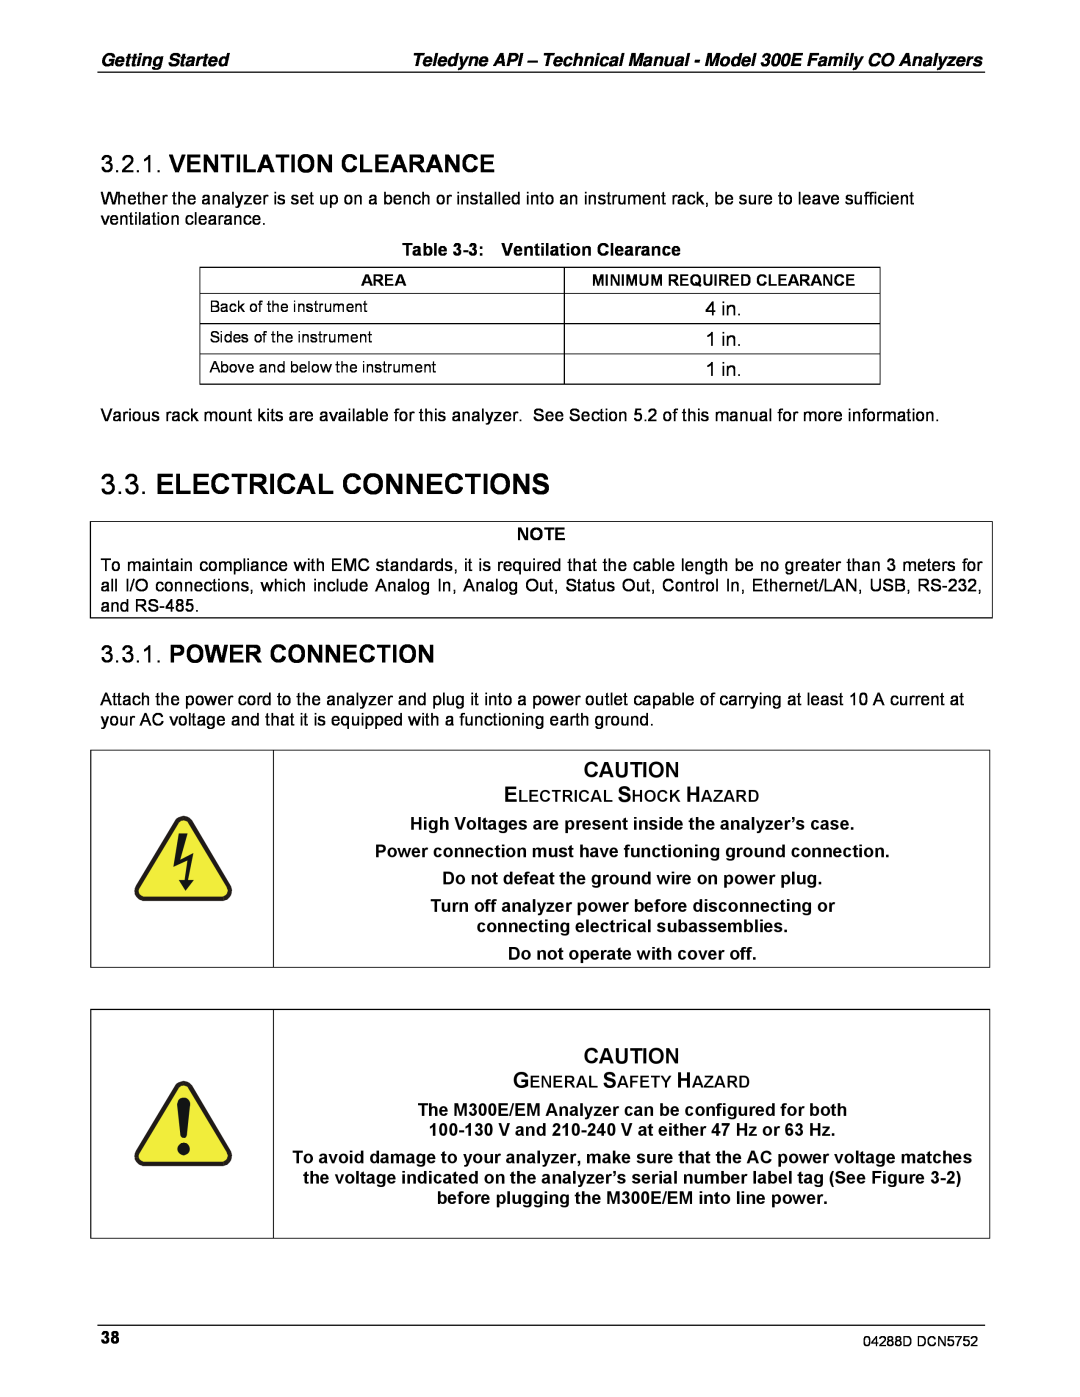 Teledyne M300EM Electrical Connections, Power Connection, 3:Ventilation Clearance, Electrical Shock Hazard 